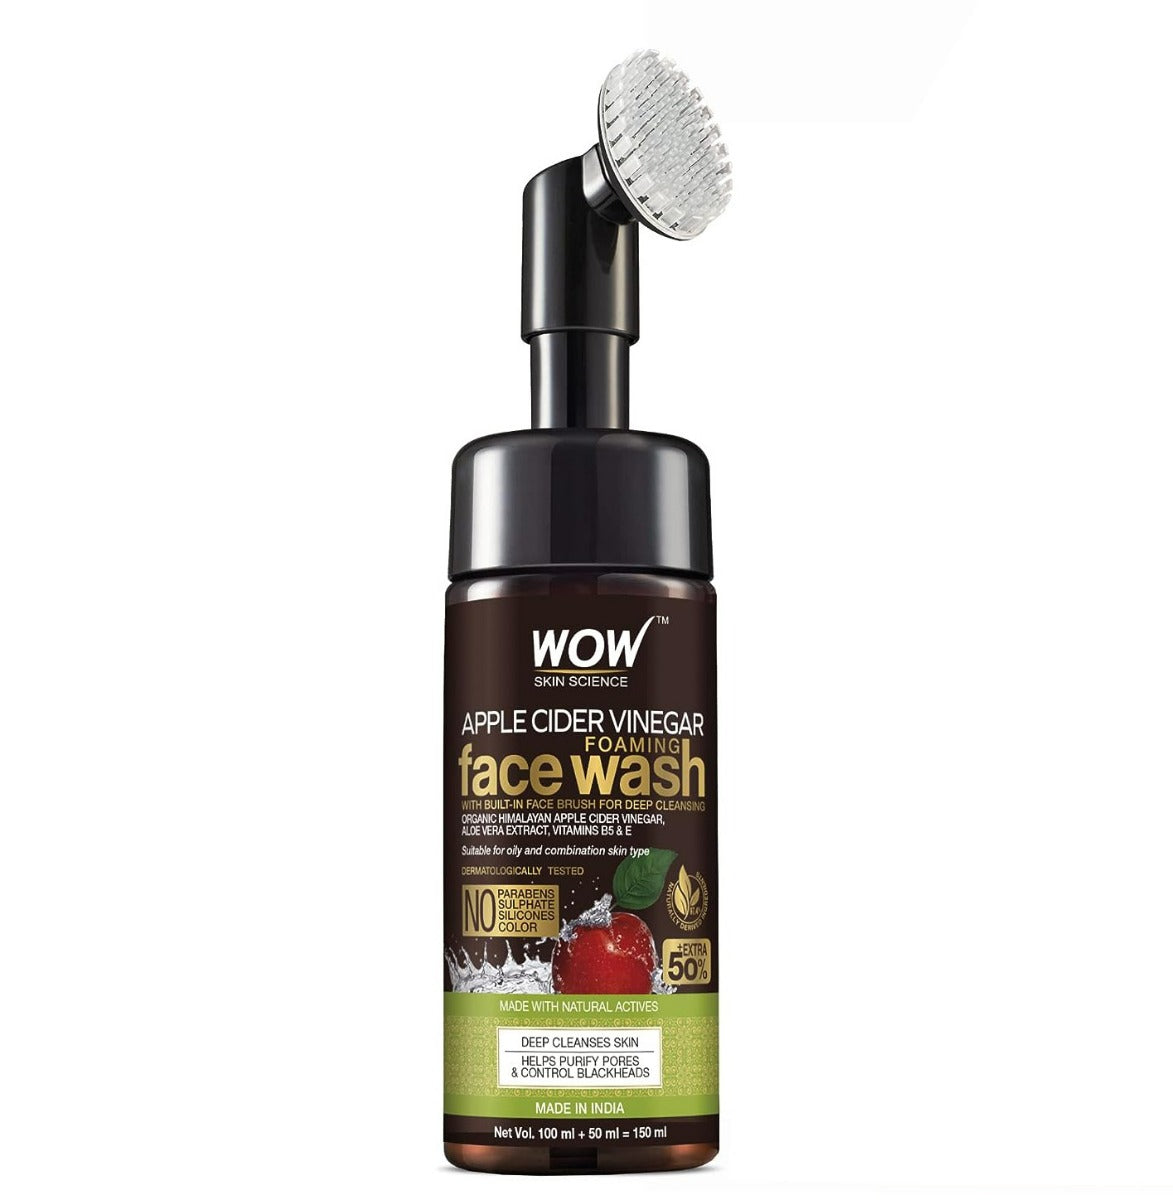 Wow Skin Science Apple Cider Vinegar Face Wash with Brush (150ml)